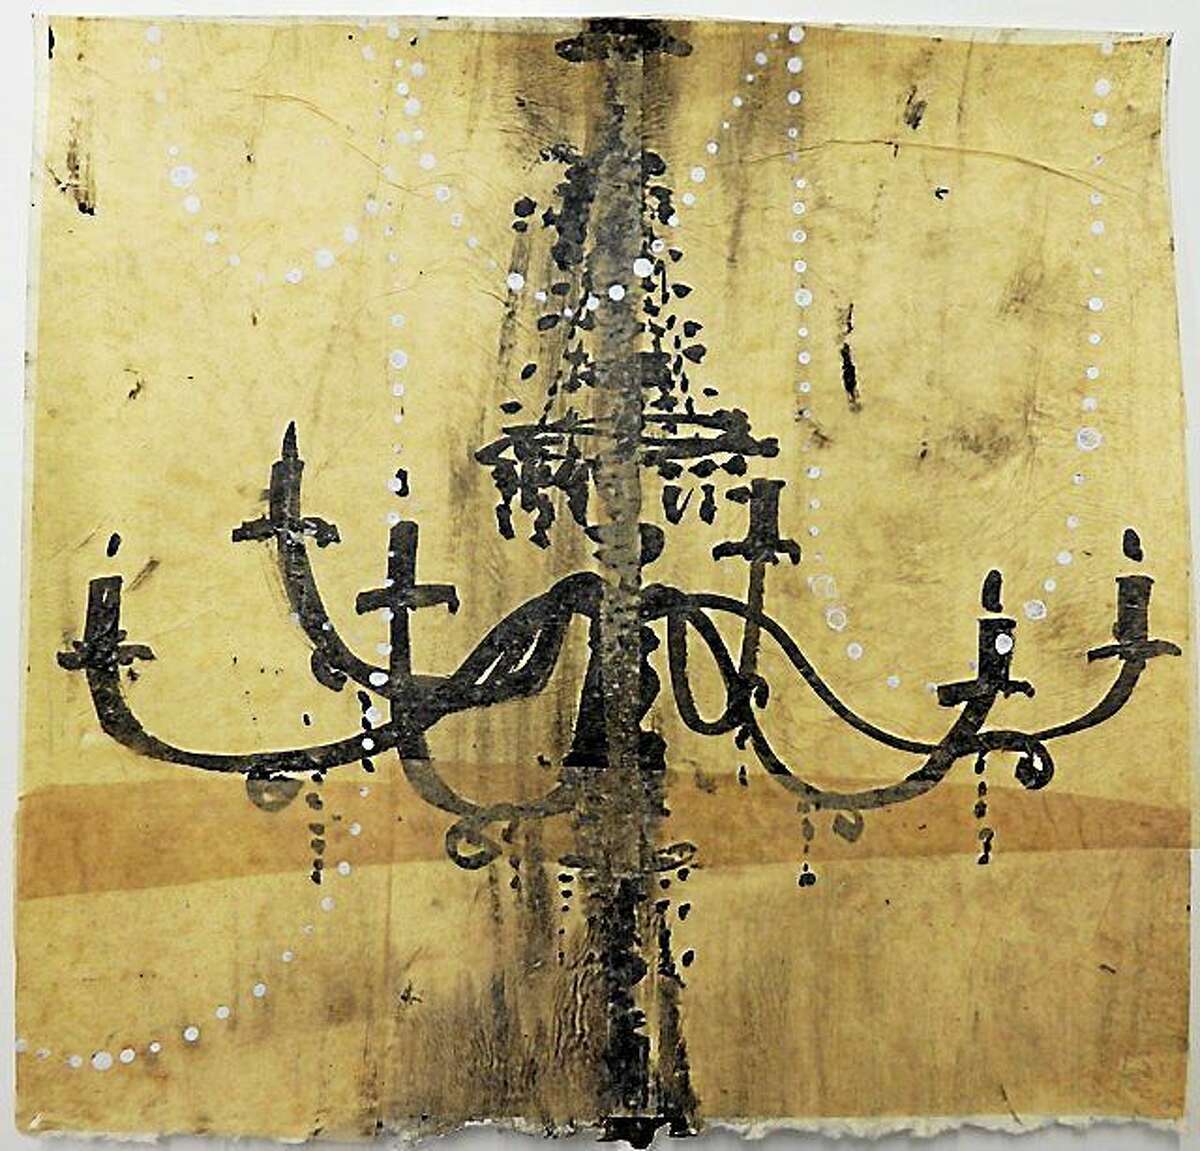 Contributed photos Janice La Motta, "Chandelier Study no. 40," 2014, ink, gesso & chine colle, 7 ½ x 7 ½ inches, is part of Five Points Gallery's new exhibit, opening April 23 in Torrington.